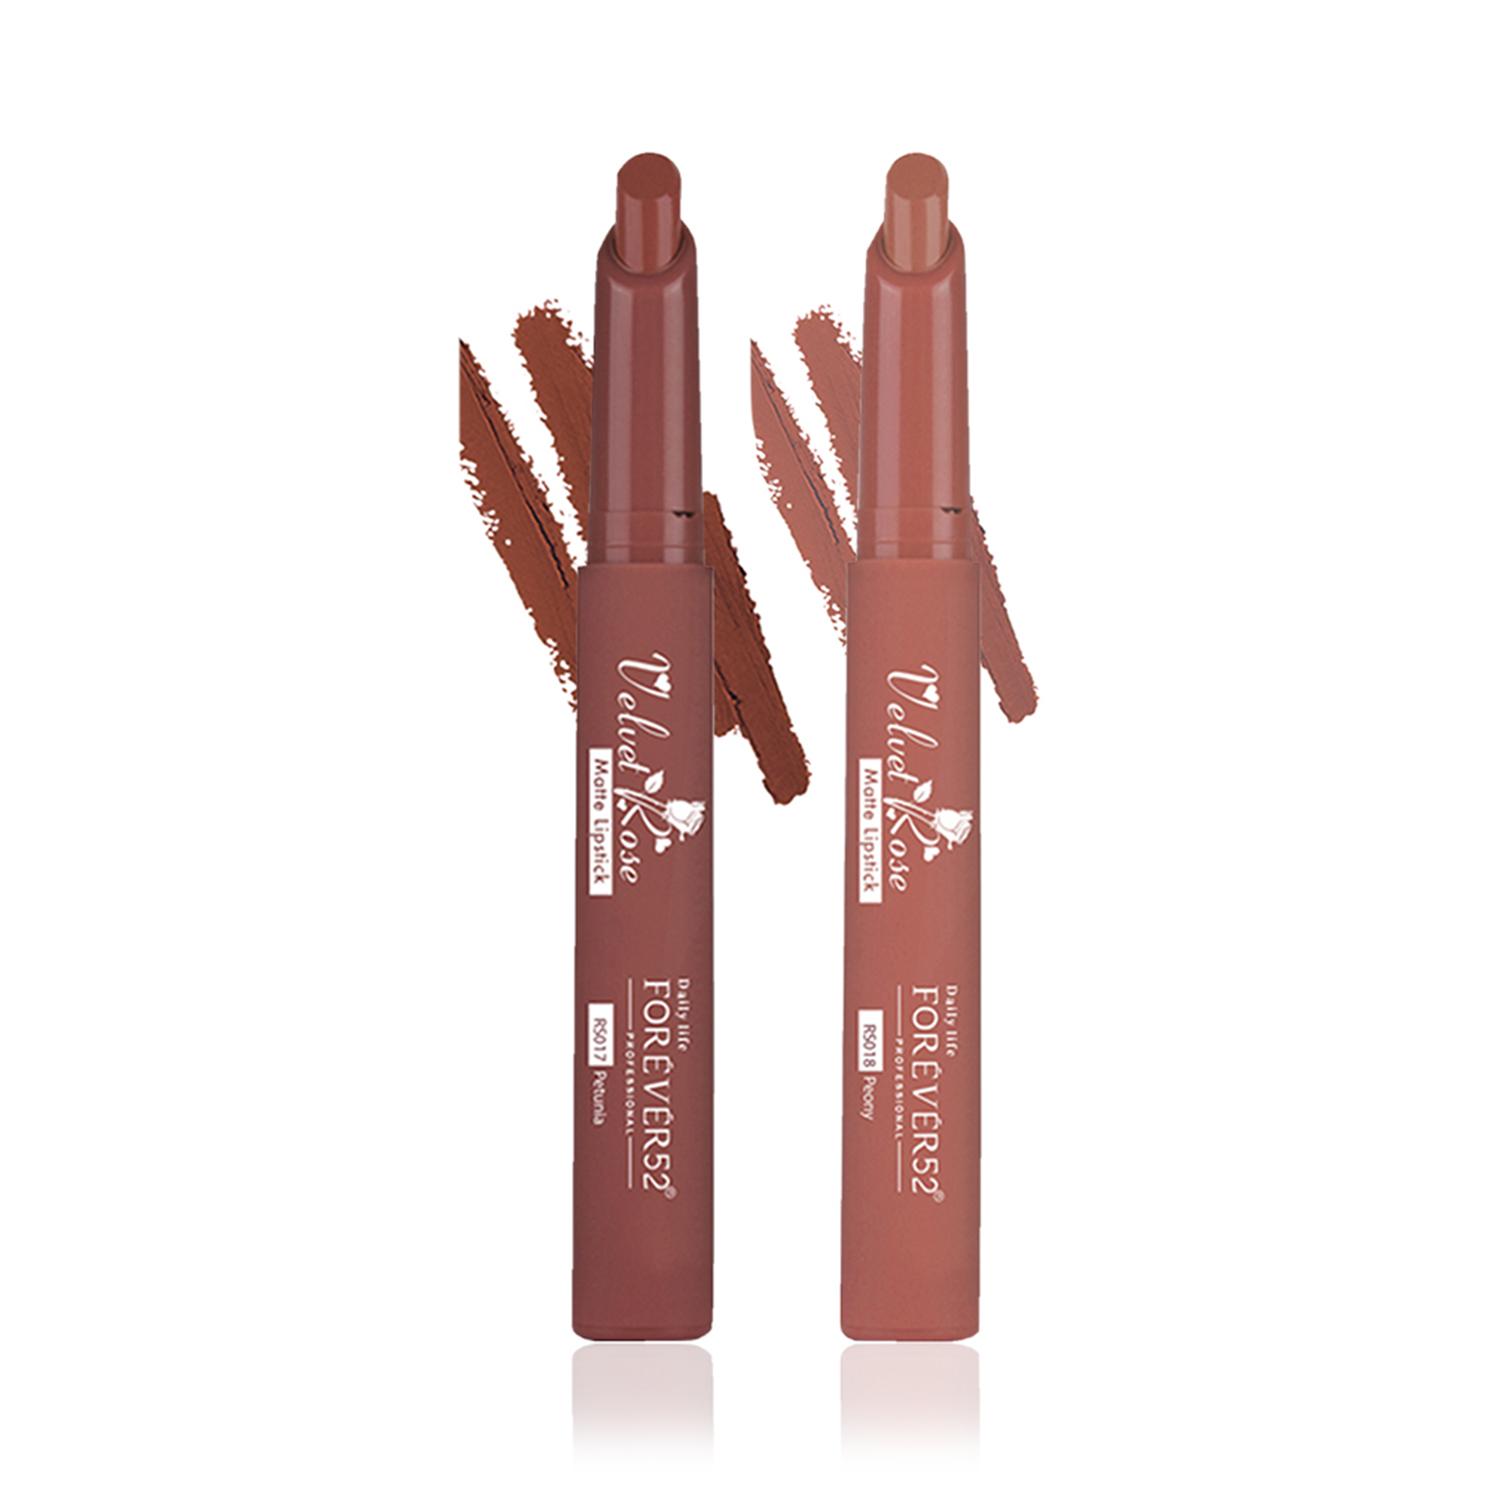 Daily Life Forever52 | Daily Life Forever52 Velvet Rose Matte Lipstick Set of 2 Crayons Combo - Nude Shades (Peony,Petunia)